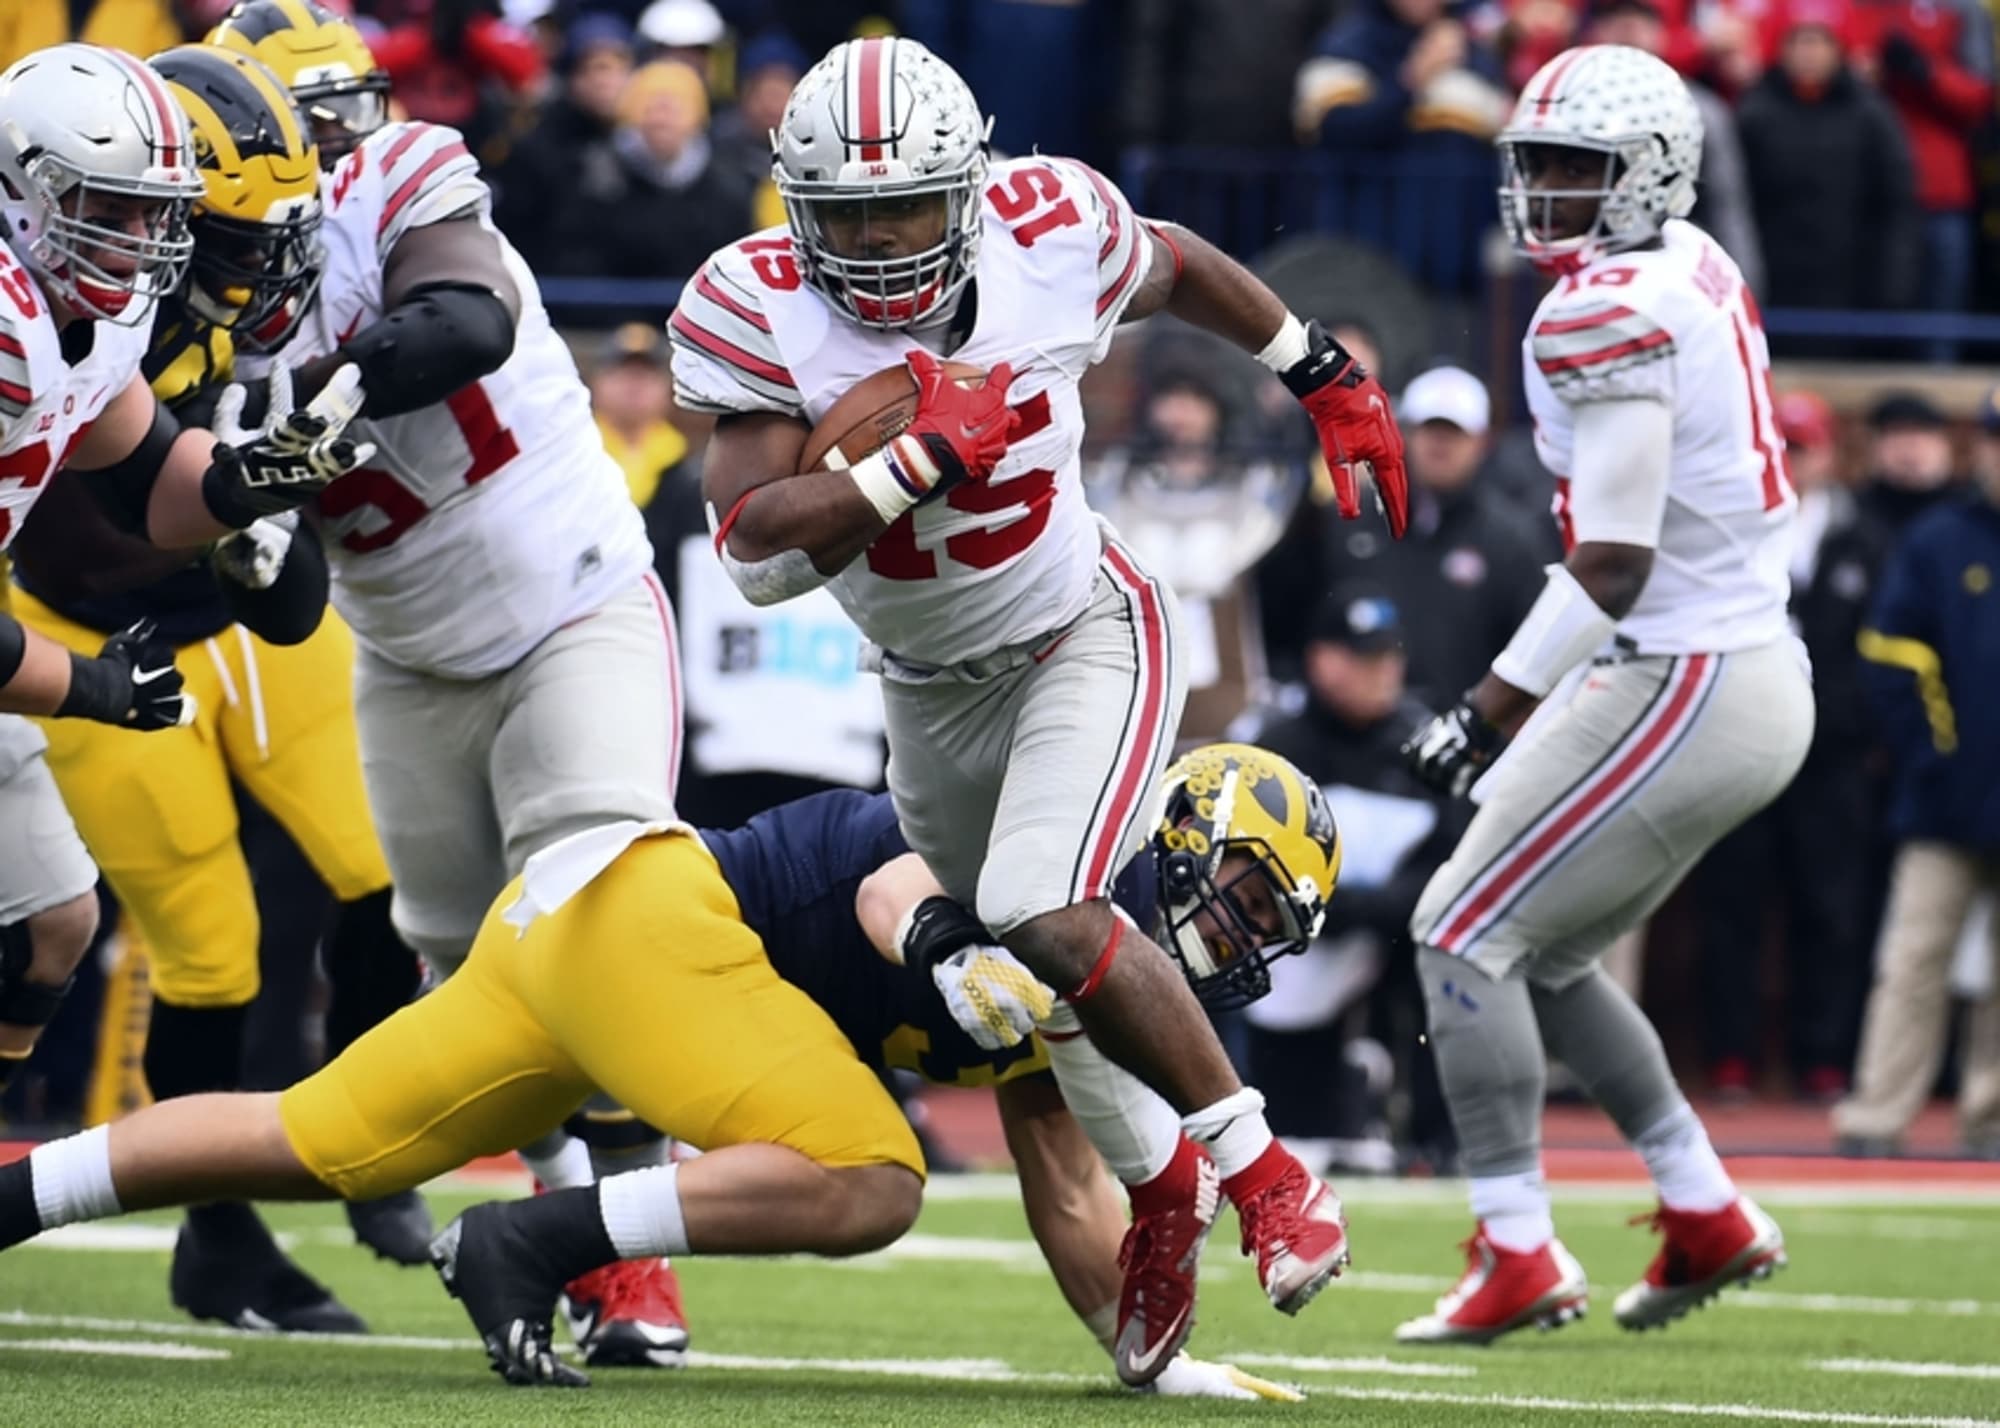 Ohio State vs. Michigan Full highlights, final score and more